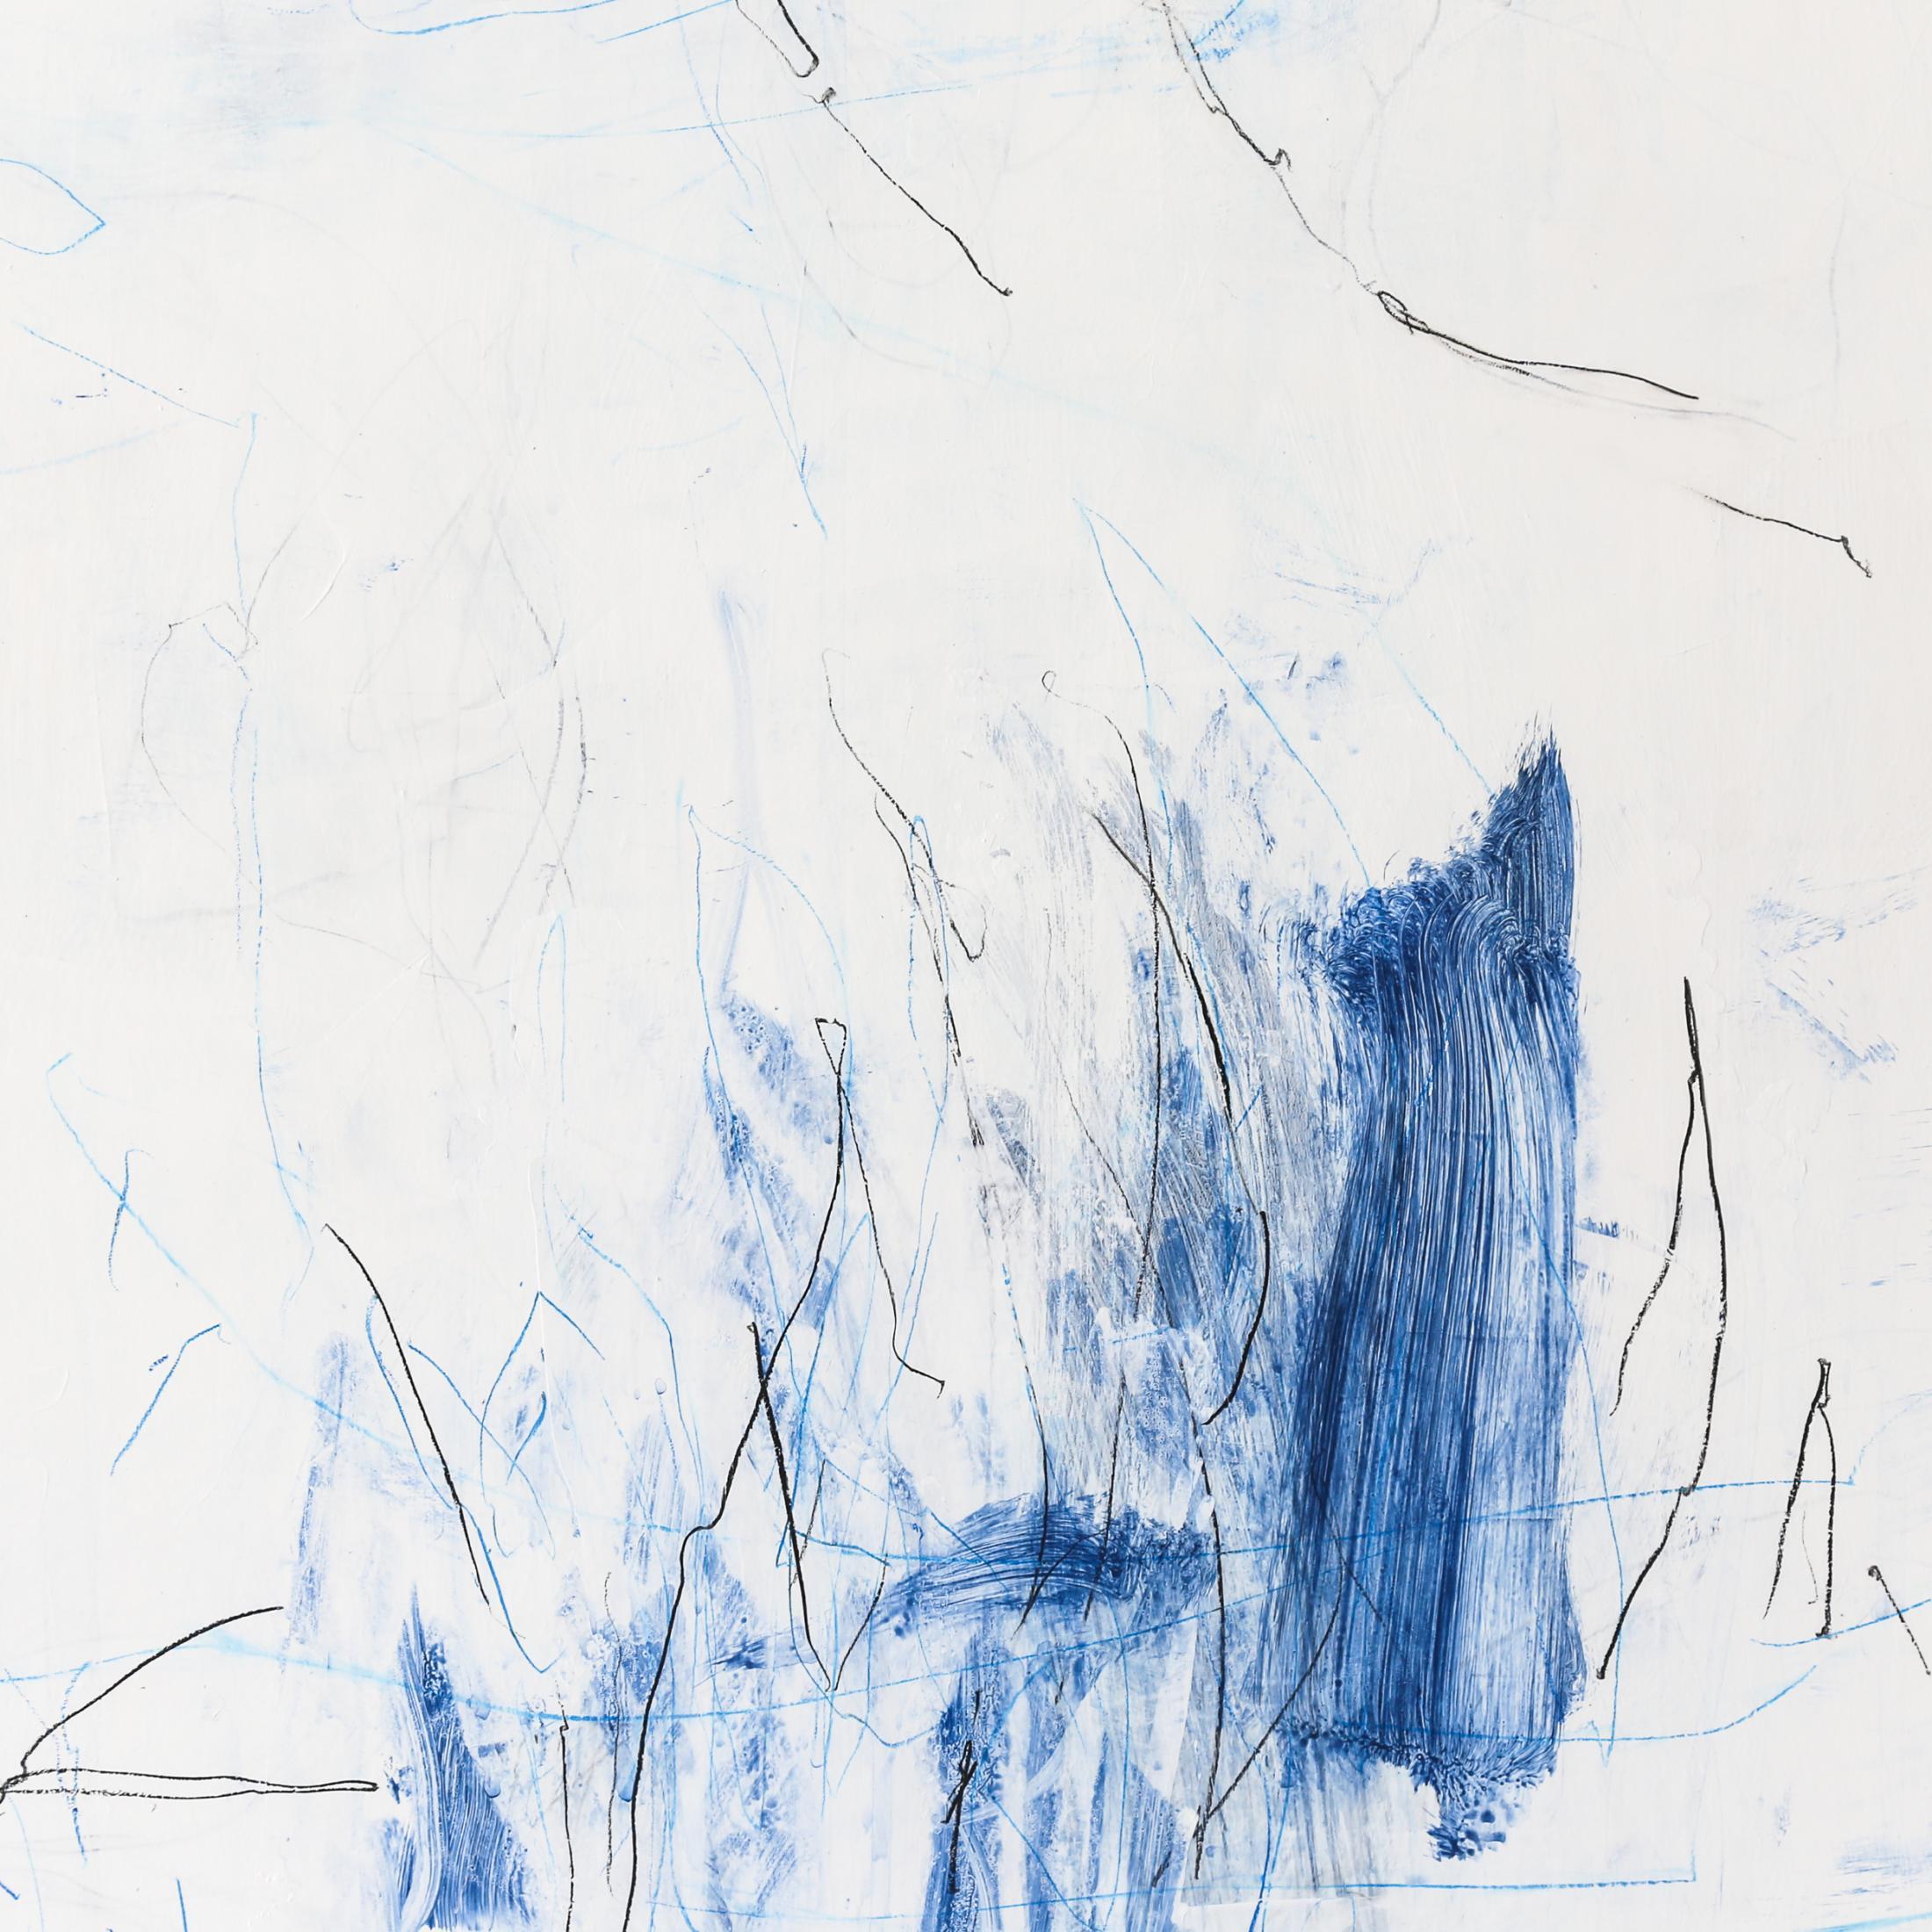 PATTI PARSONS
True Blue (Grass)
• ink stick, china marker, acrylic paint on wood panel
30.00w x 30.00h x 2.00d in
$4,500.00
From the perspective of a writer and a painter, Patti finds the intrigue of tangles and the appearance of chaos to be an